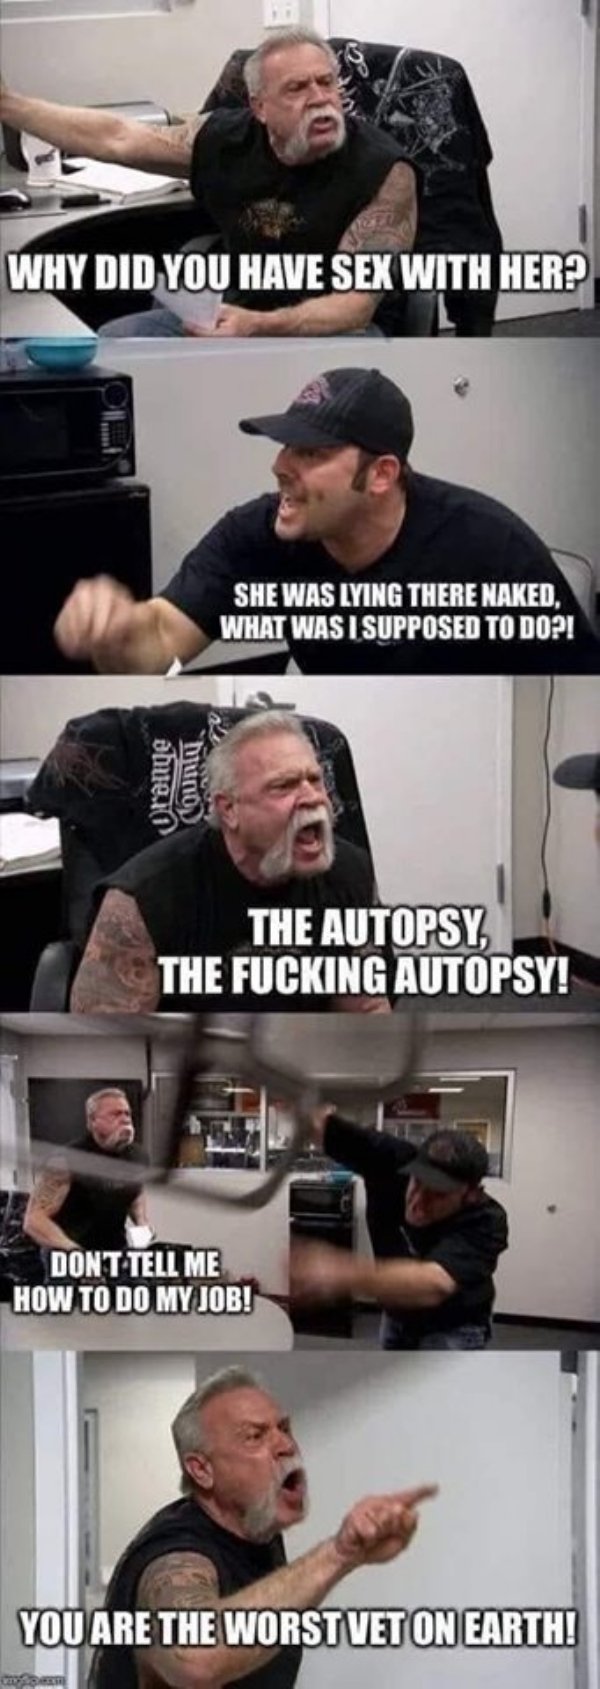 norway socialism meme - Why Did You Have Sex With Her? She Was Lying There Naked, What Was I Supposed To Do?! sme.ro 10 The Autopsy The Fucking Autopsy! Dont Tell Me How To Do My Job! You Are The Worst Vet On Earth!